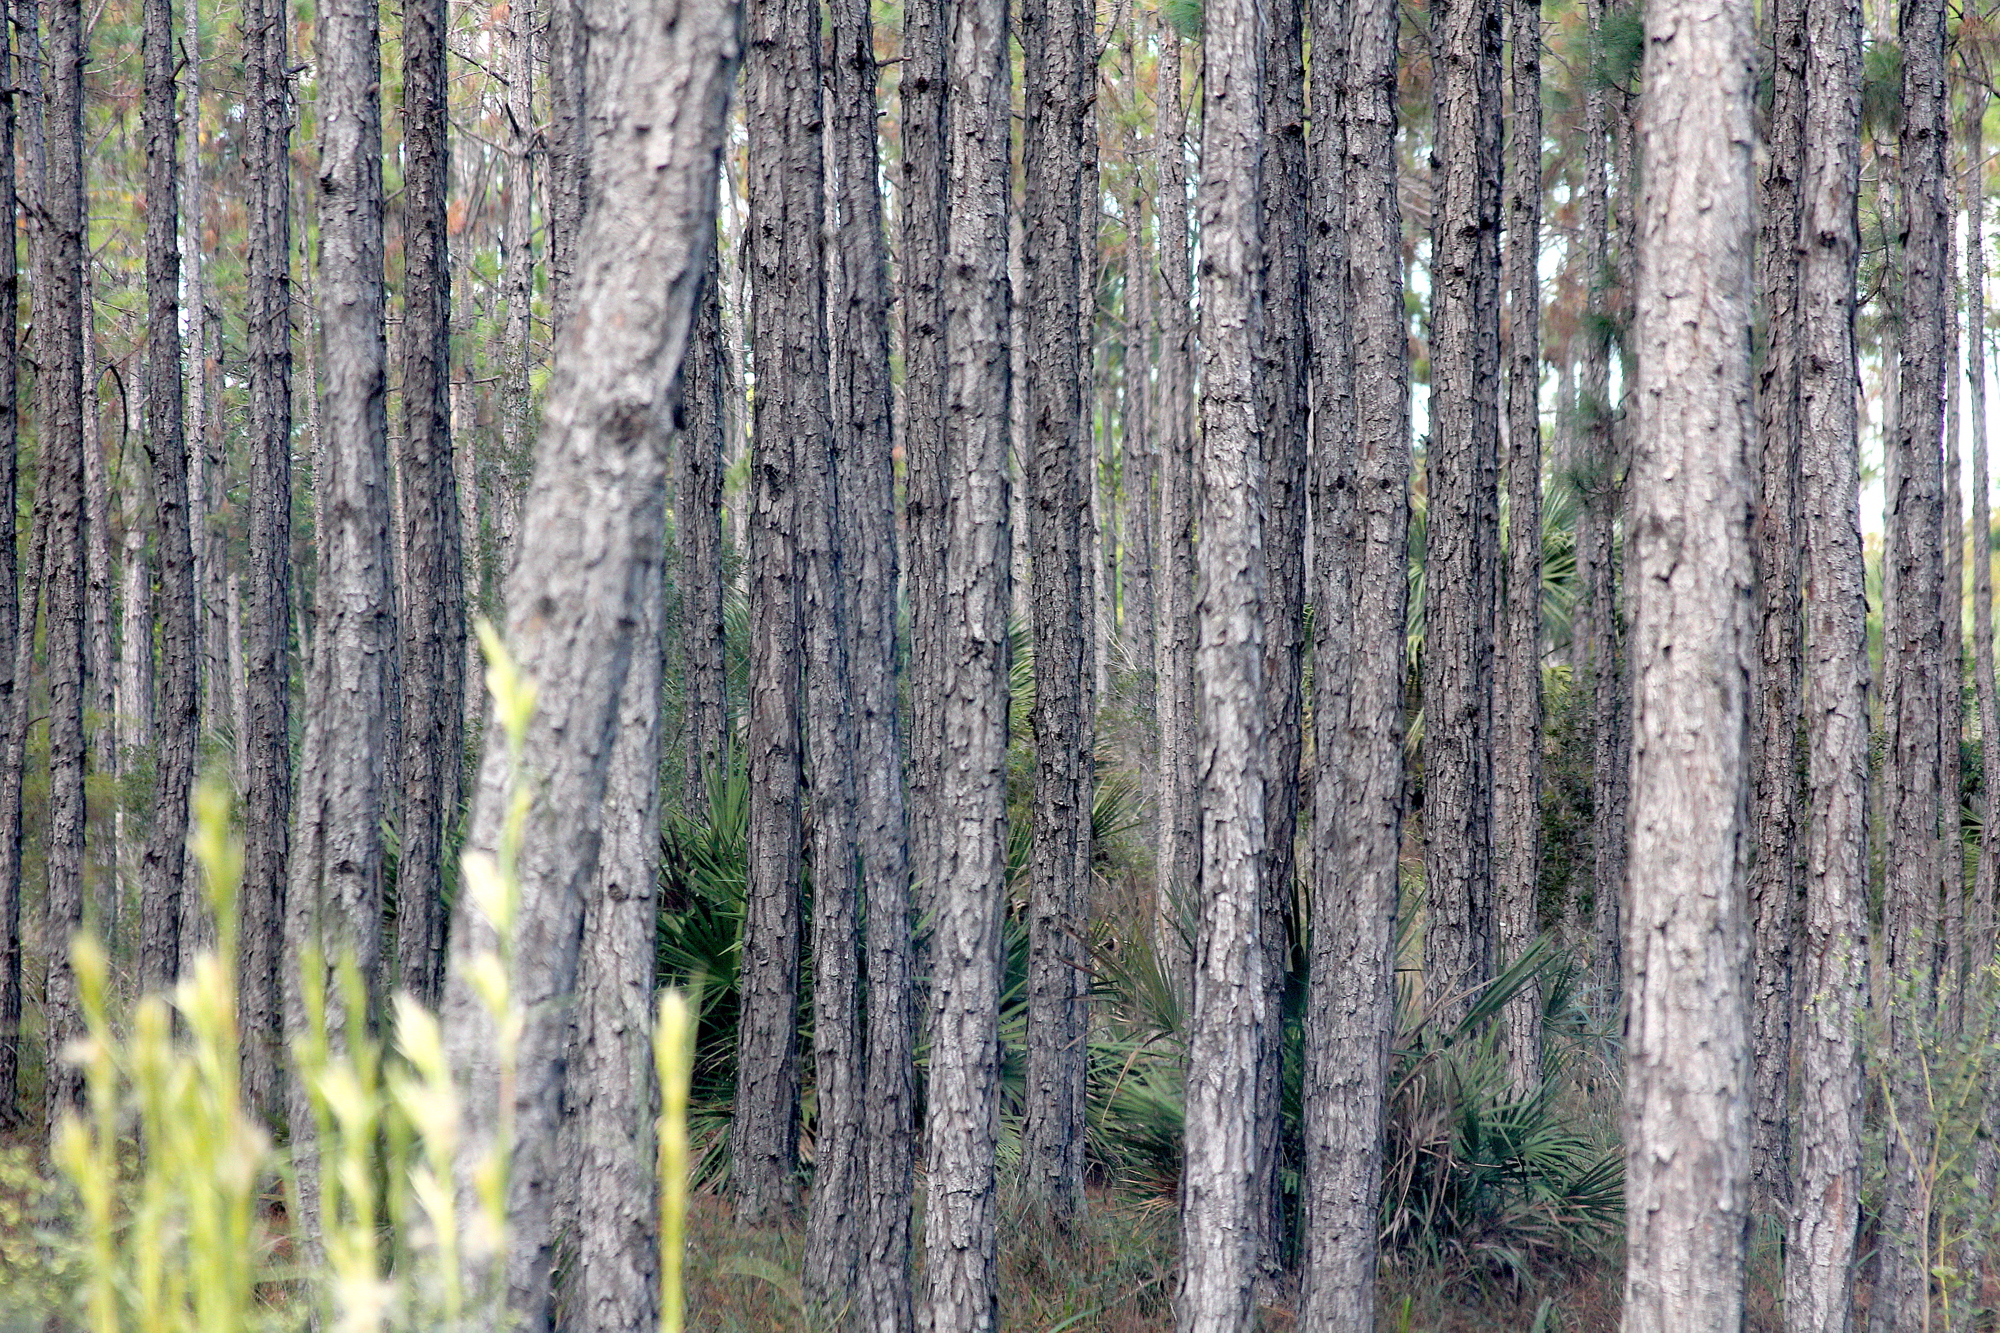 The pine trees that are found all around Palm Coast were planted to be harvested, Scott Sowers said. 